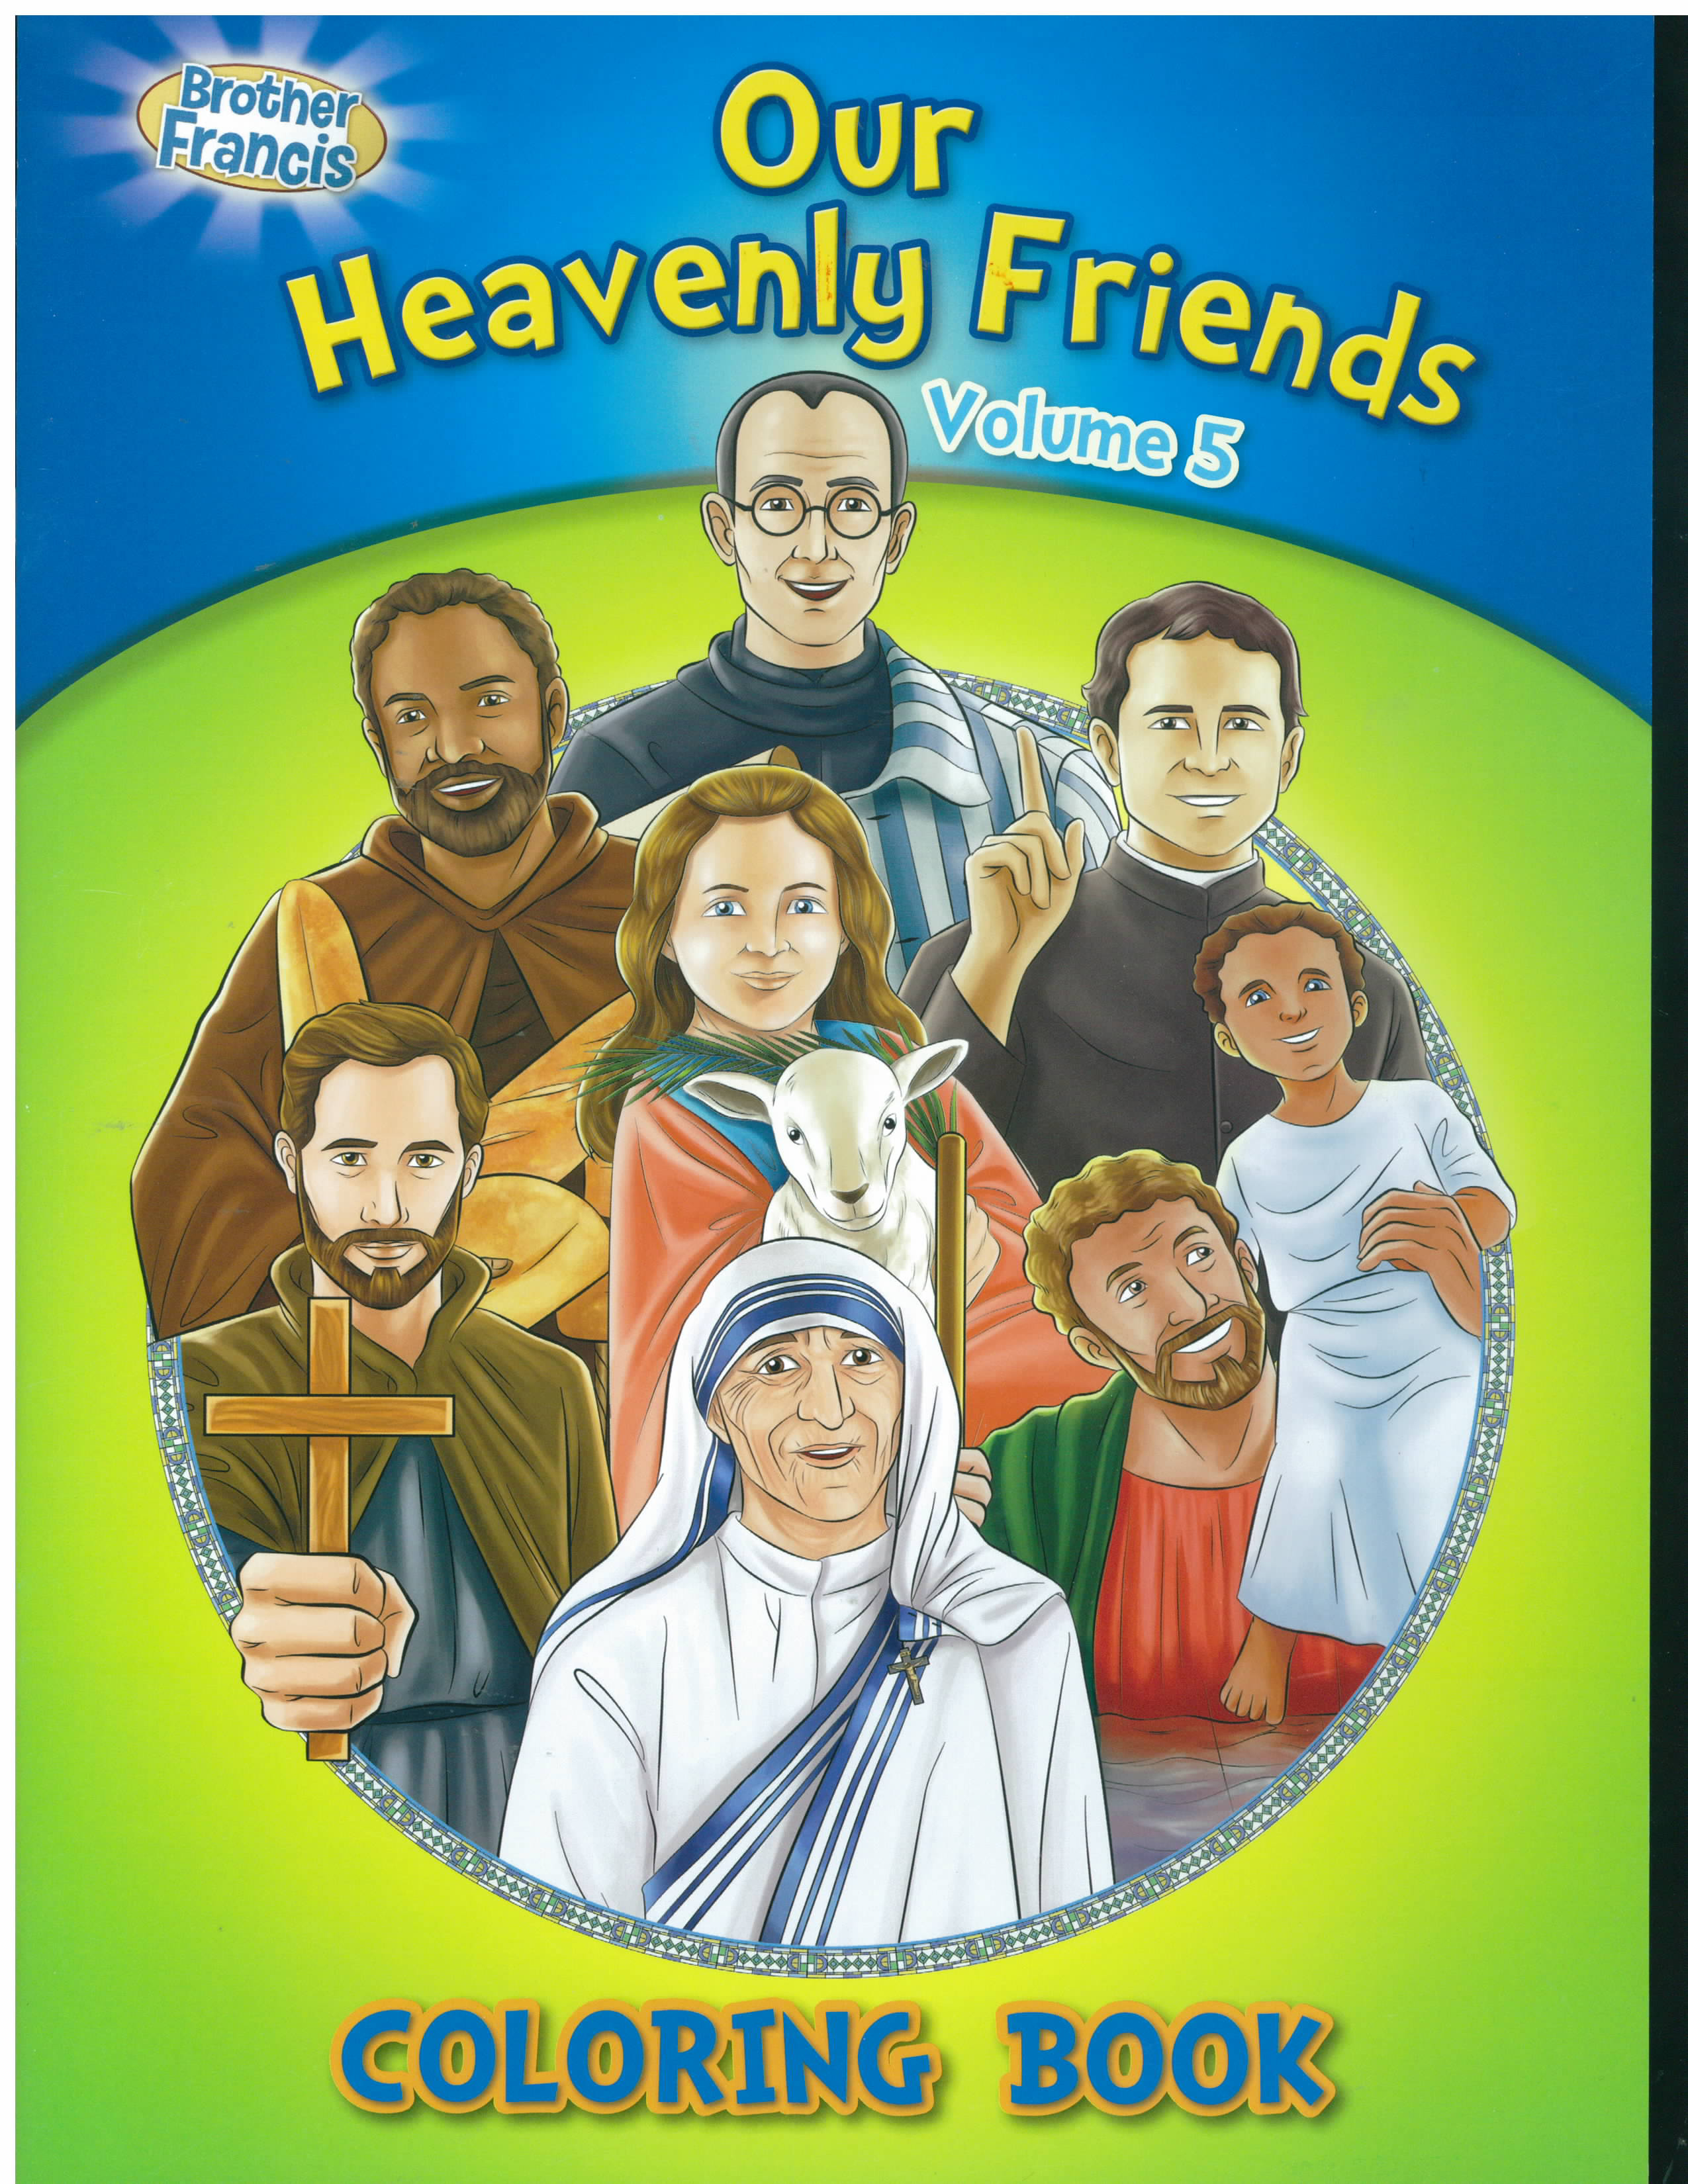 Our Heavenly Friends Volume 5 Coloring Book about the Saints -CSB-HF5 